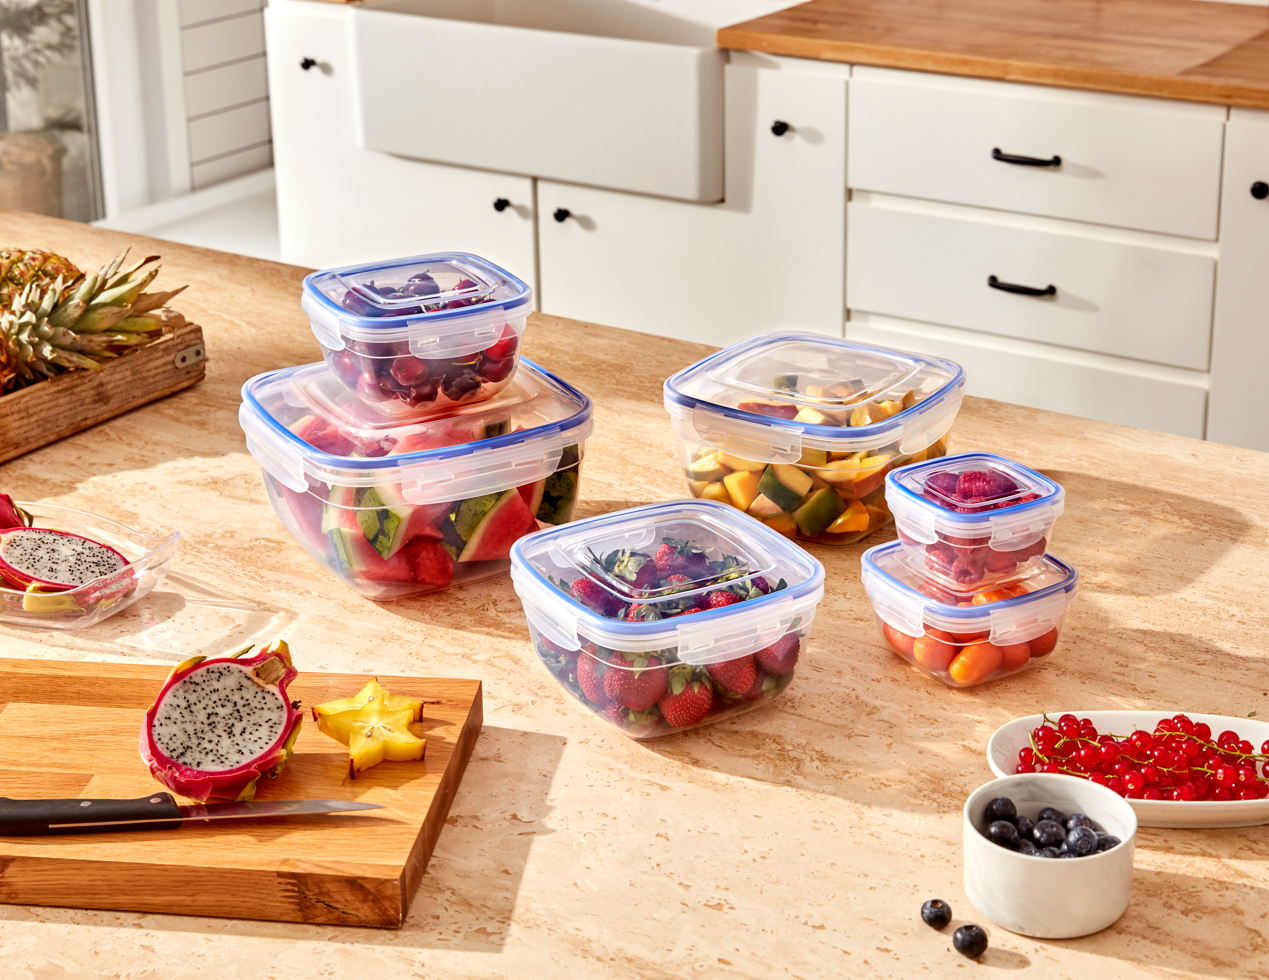 Superio Food Storage Containers, Airtight Leak-Proof Meal Prep Rectang